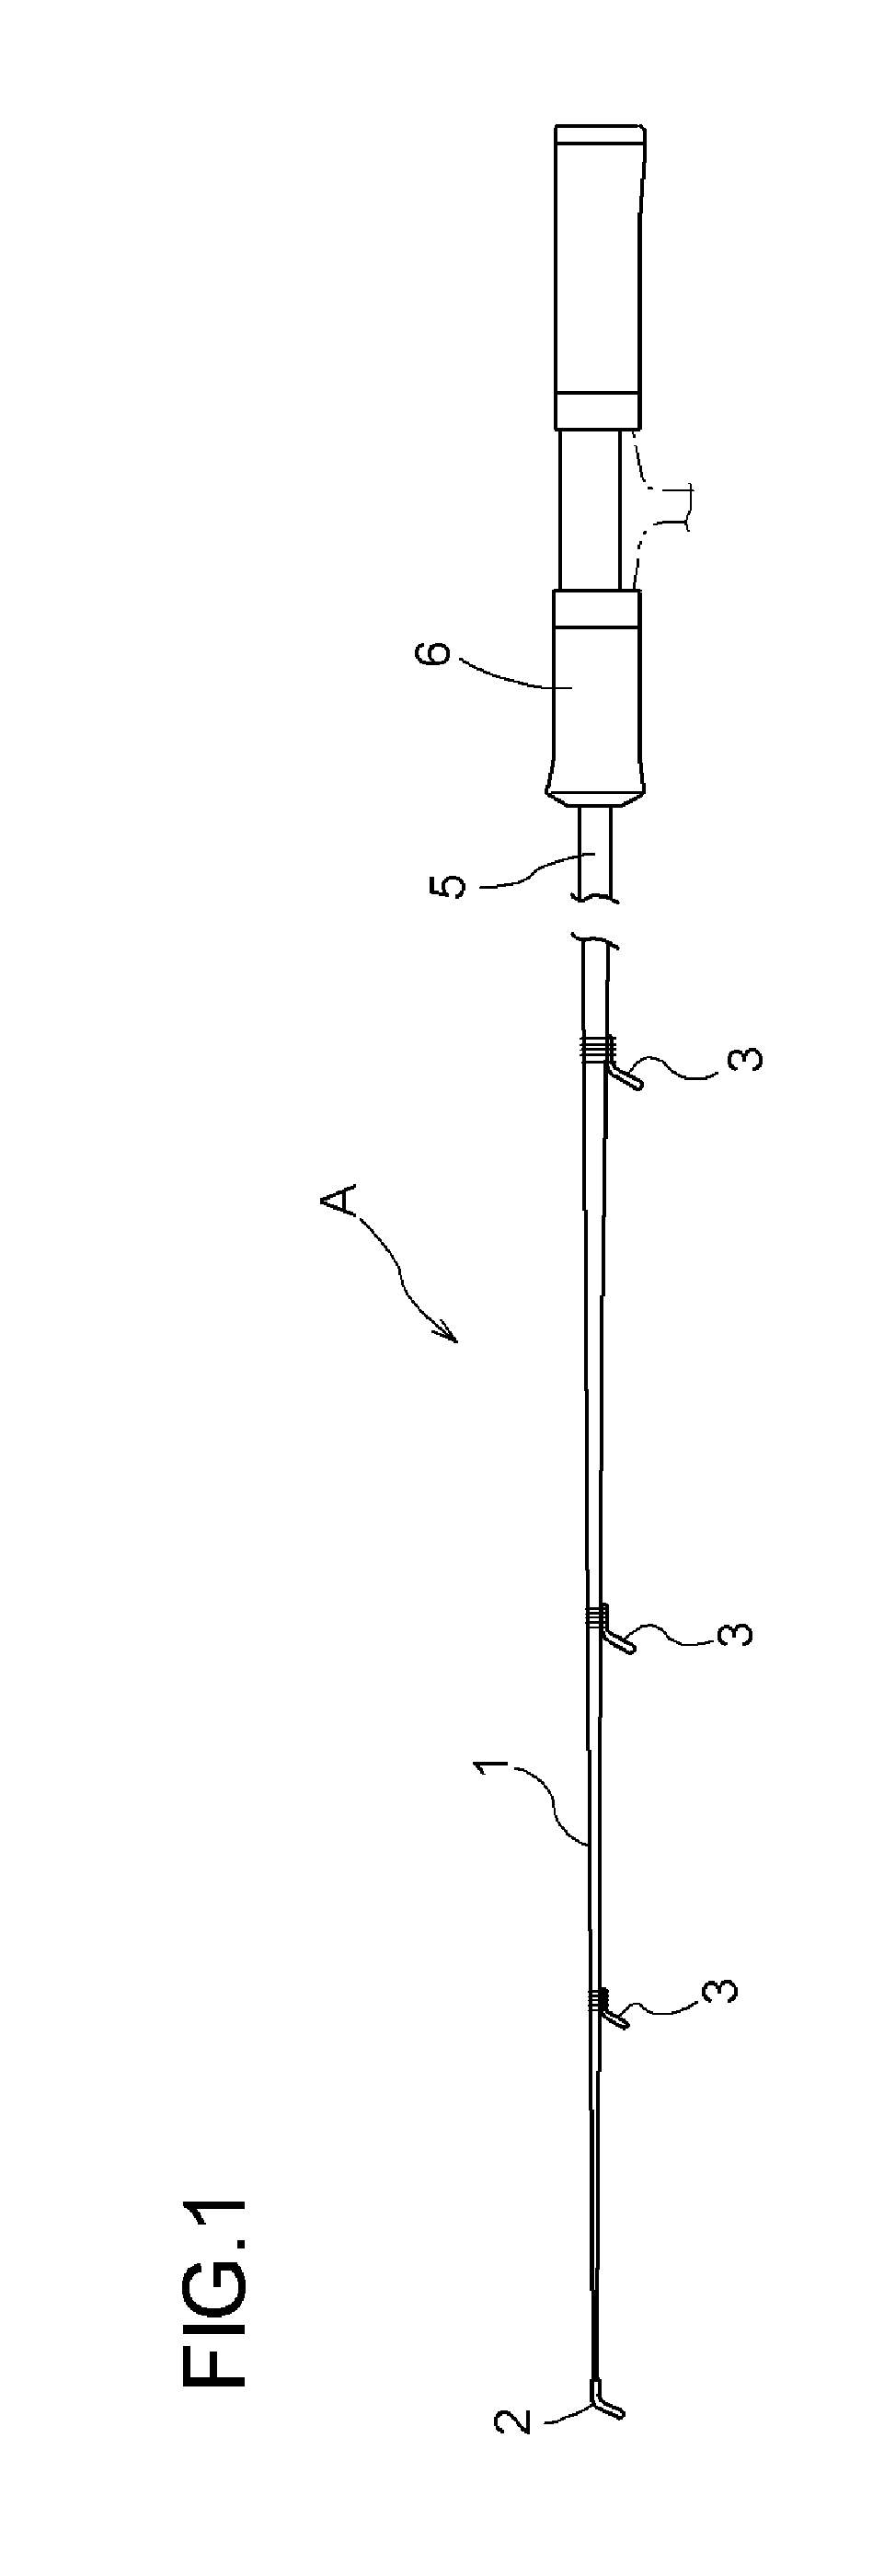 Surface ornament composition for part of fishing tackle or bicycle